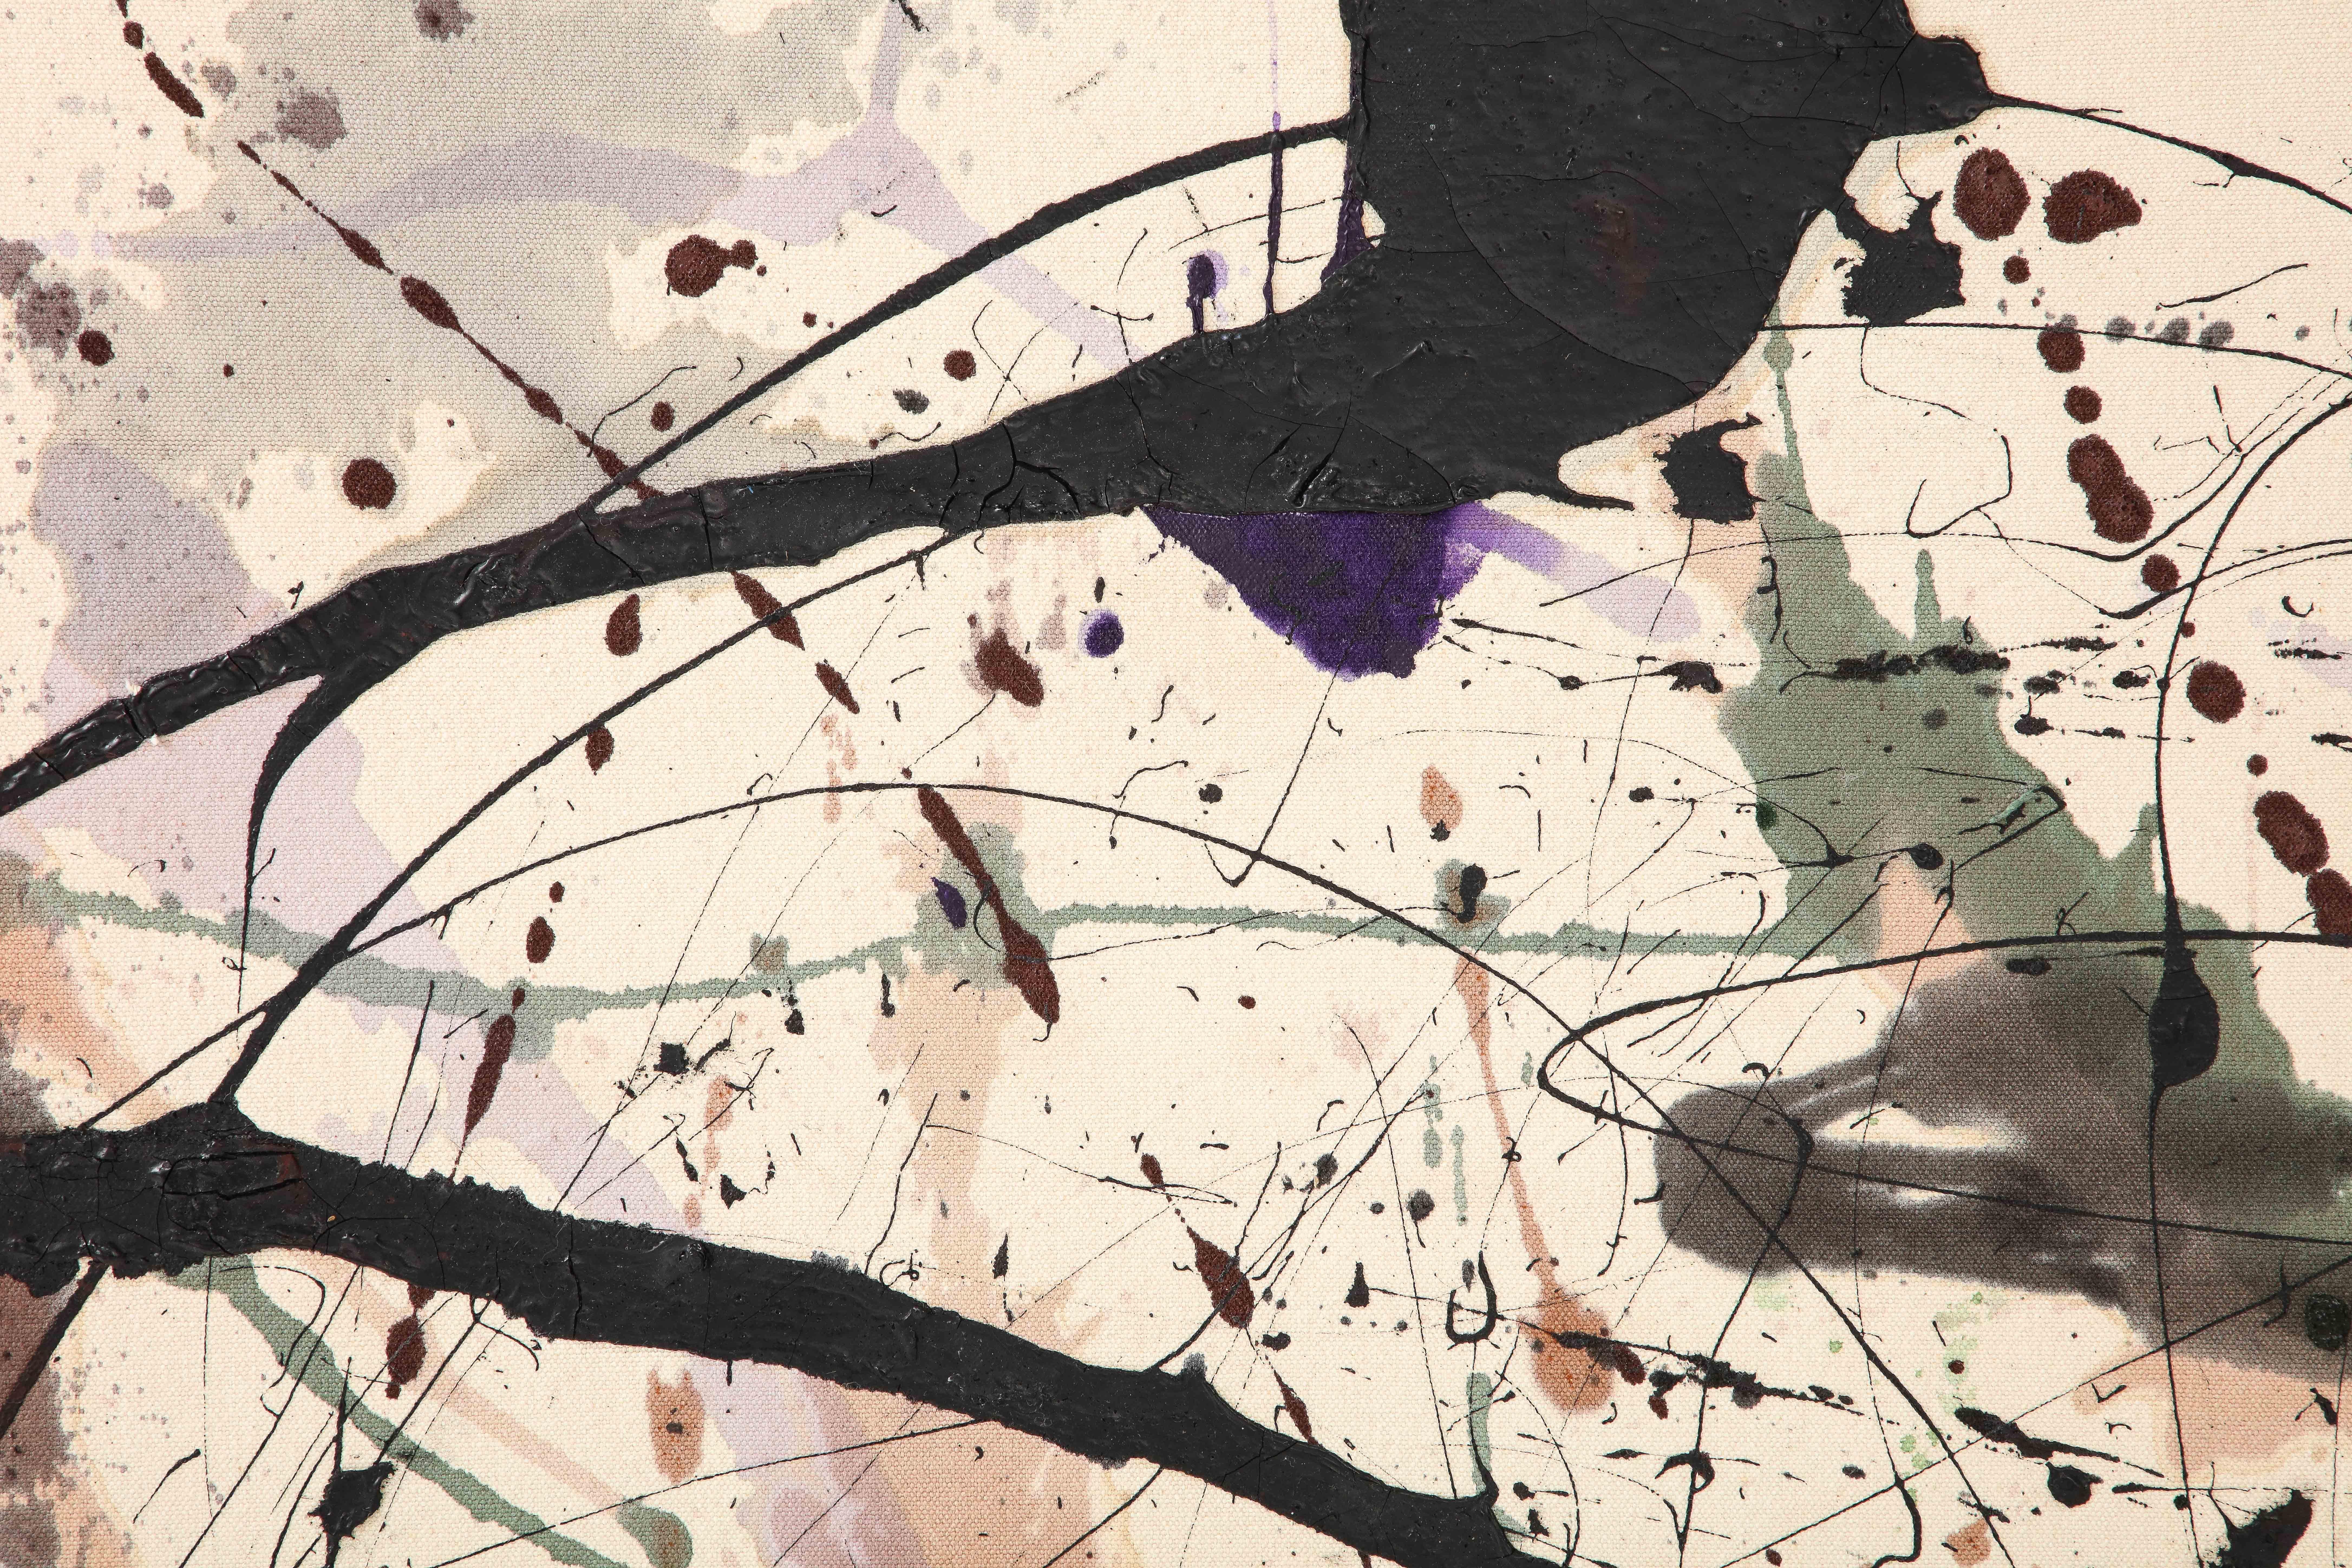 American Jackson Pollock Style Artwork By Woodstock, NY Artist For Sale